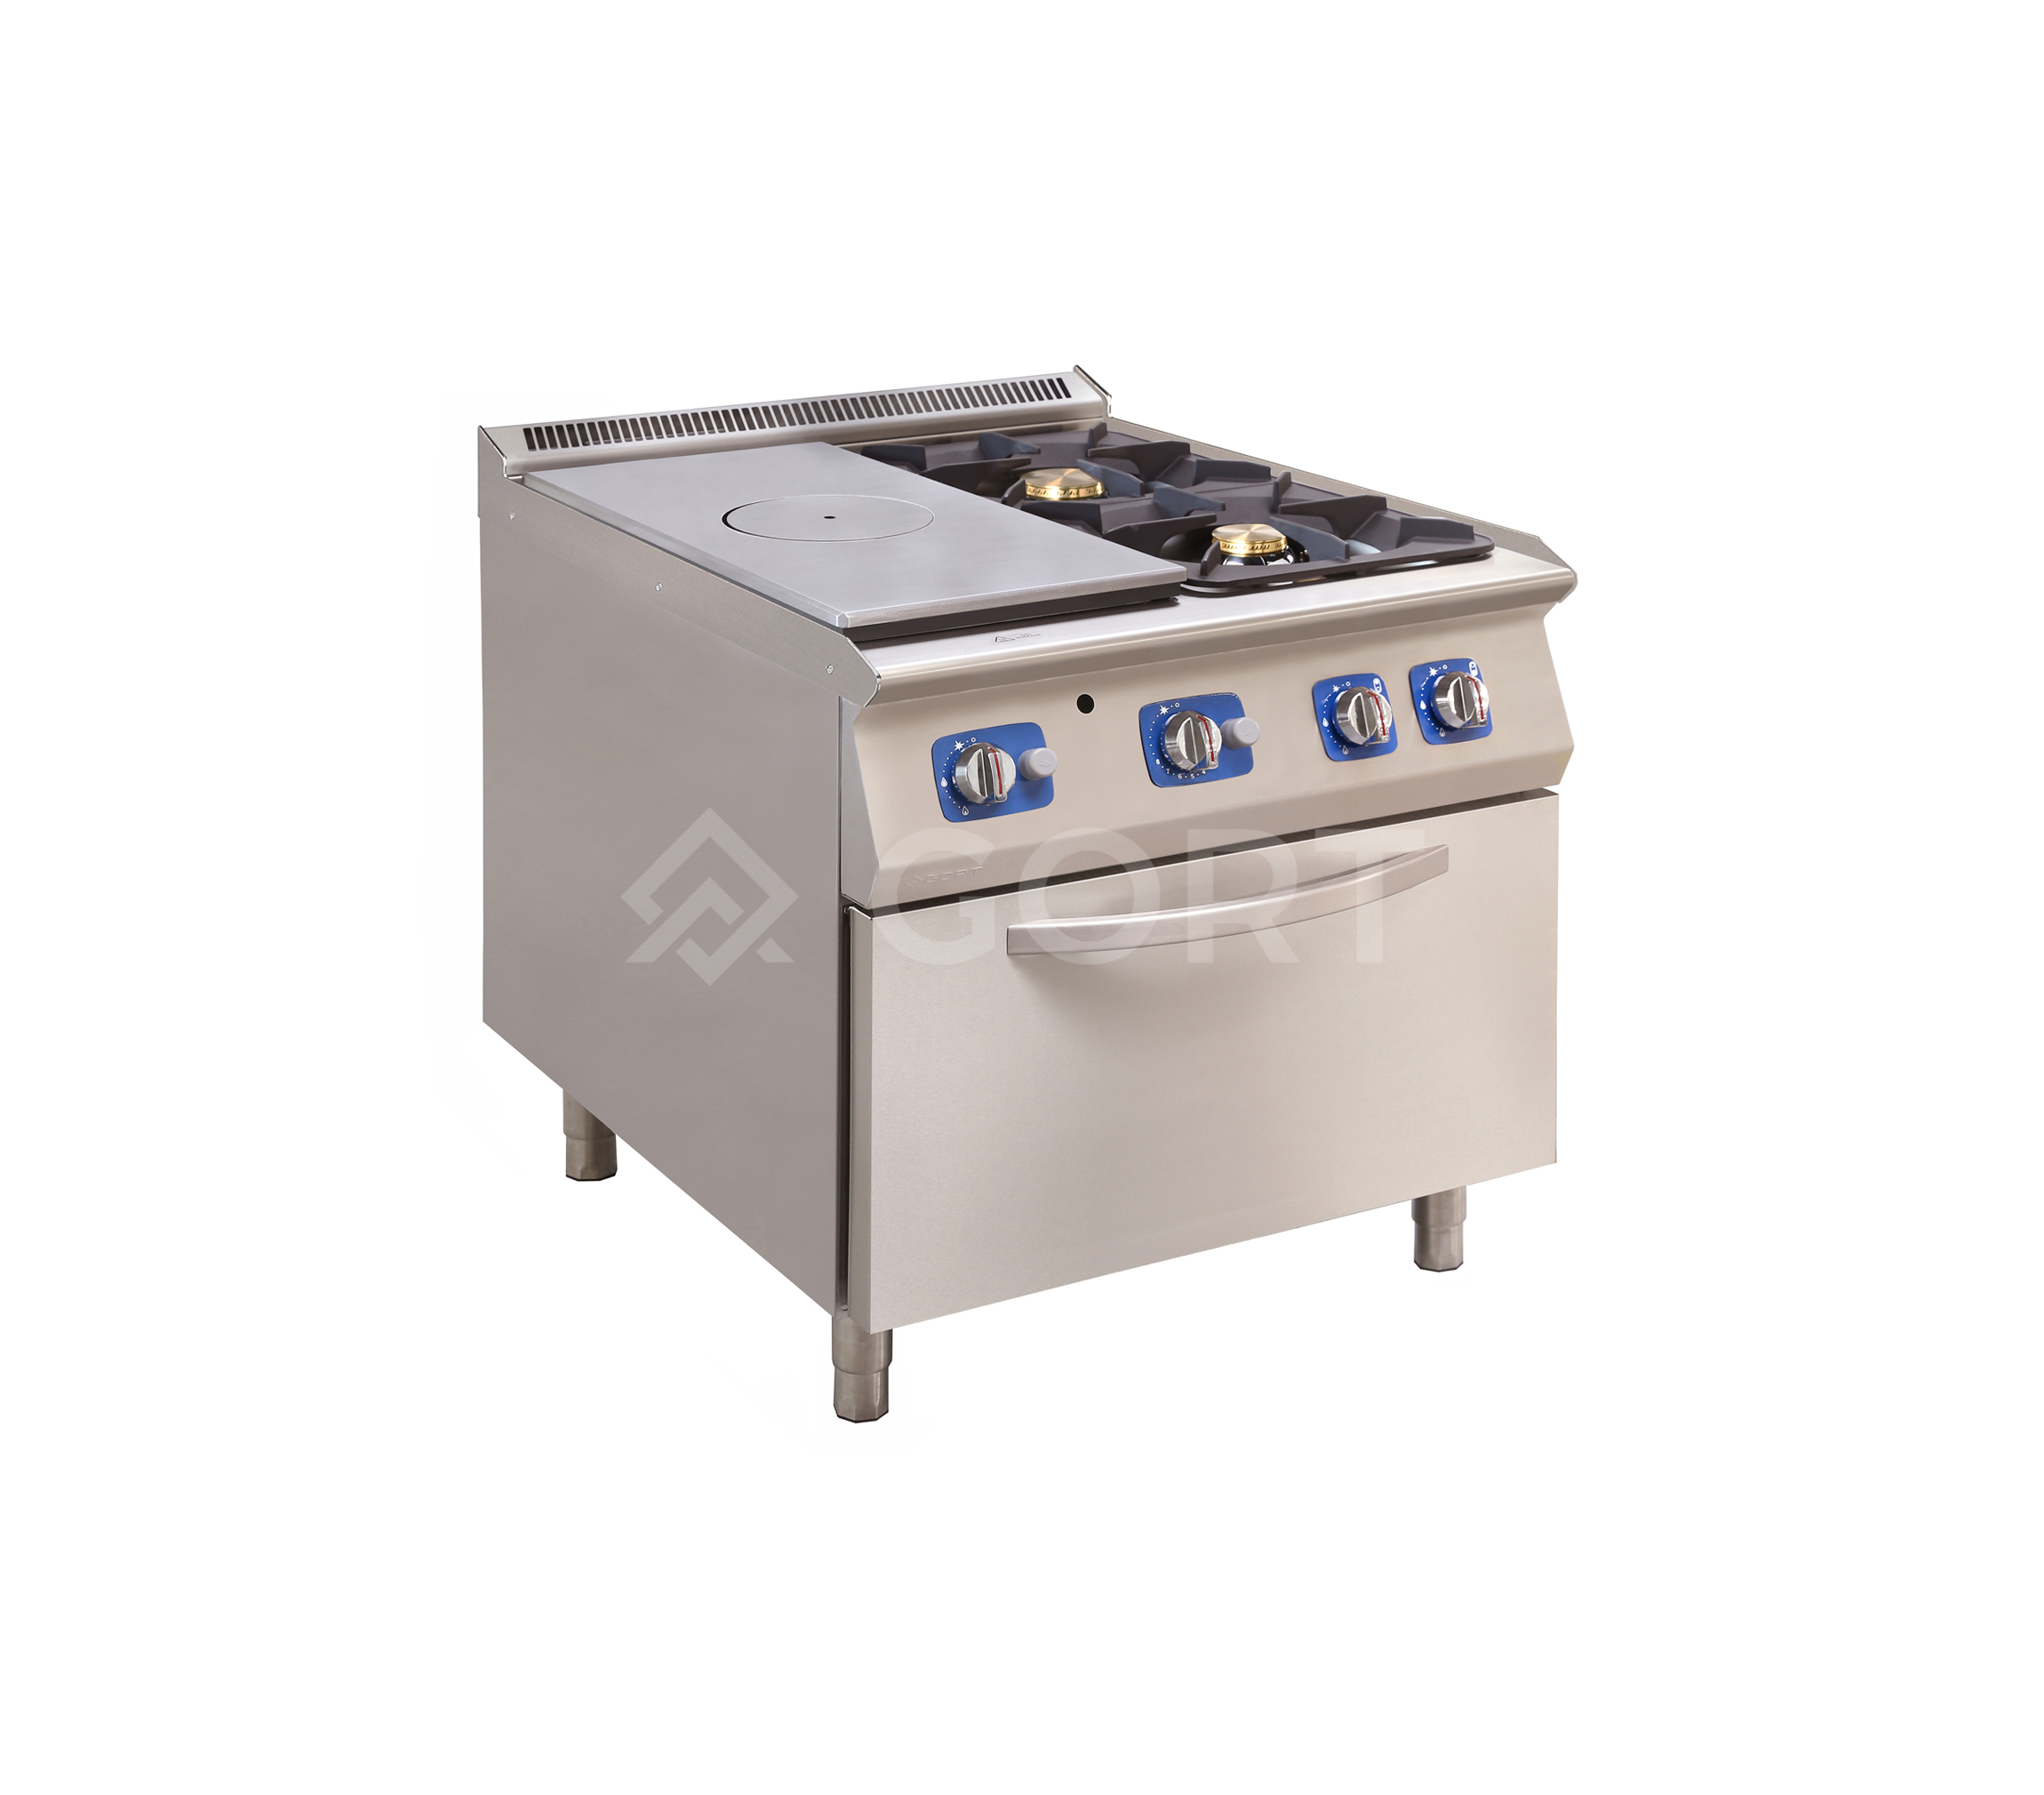 Gas solid top with 2 burner gas cooking top on gas oven 800 MM L900